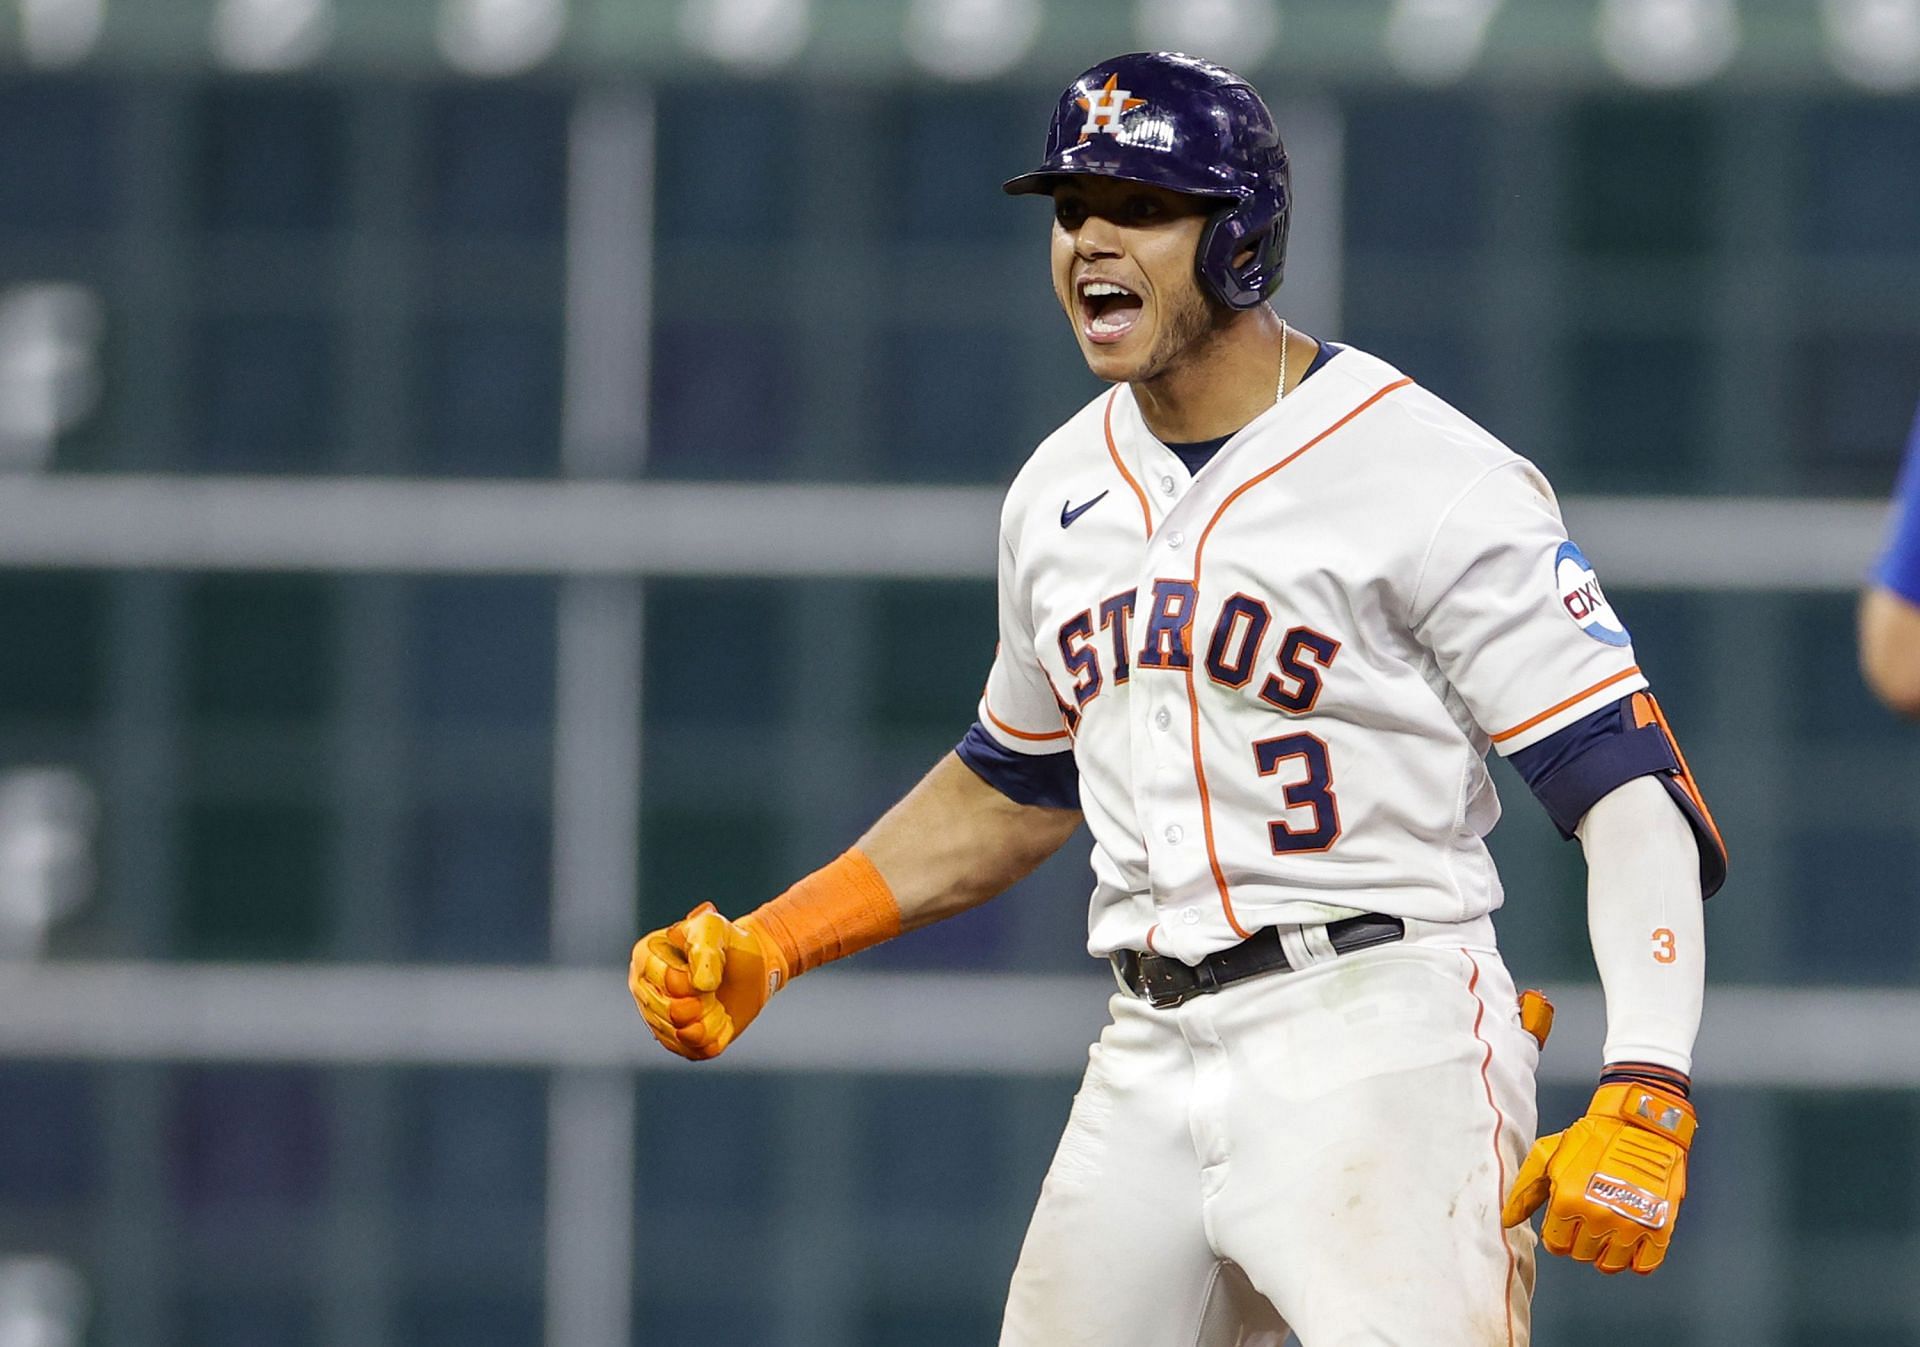 Jeremy Pena #3 of the Houston Astros reacts to hitting a double in the ninth inning vs. the Chicago Cubs